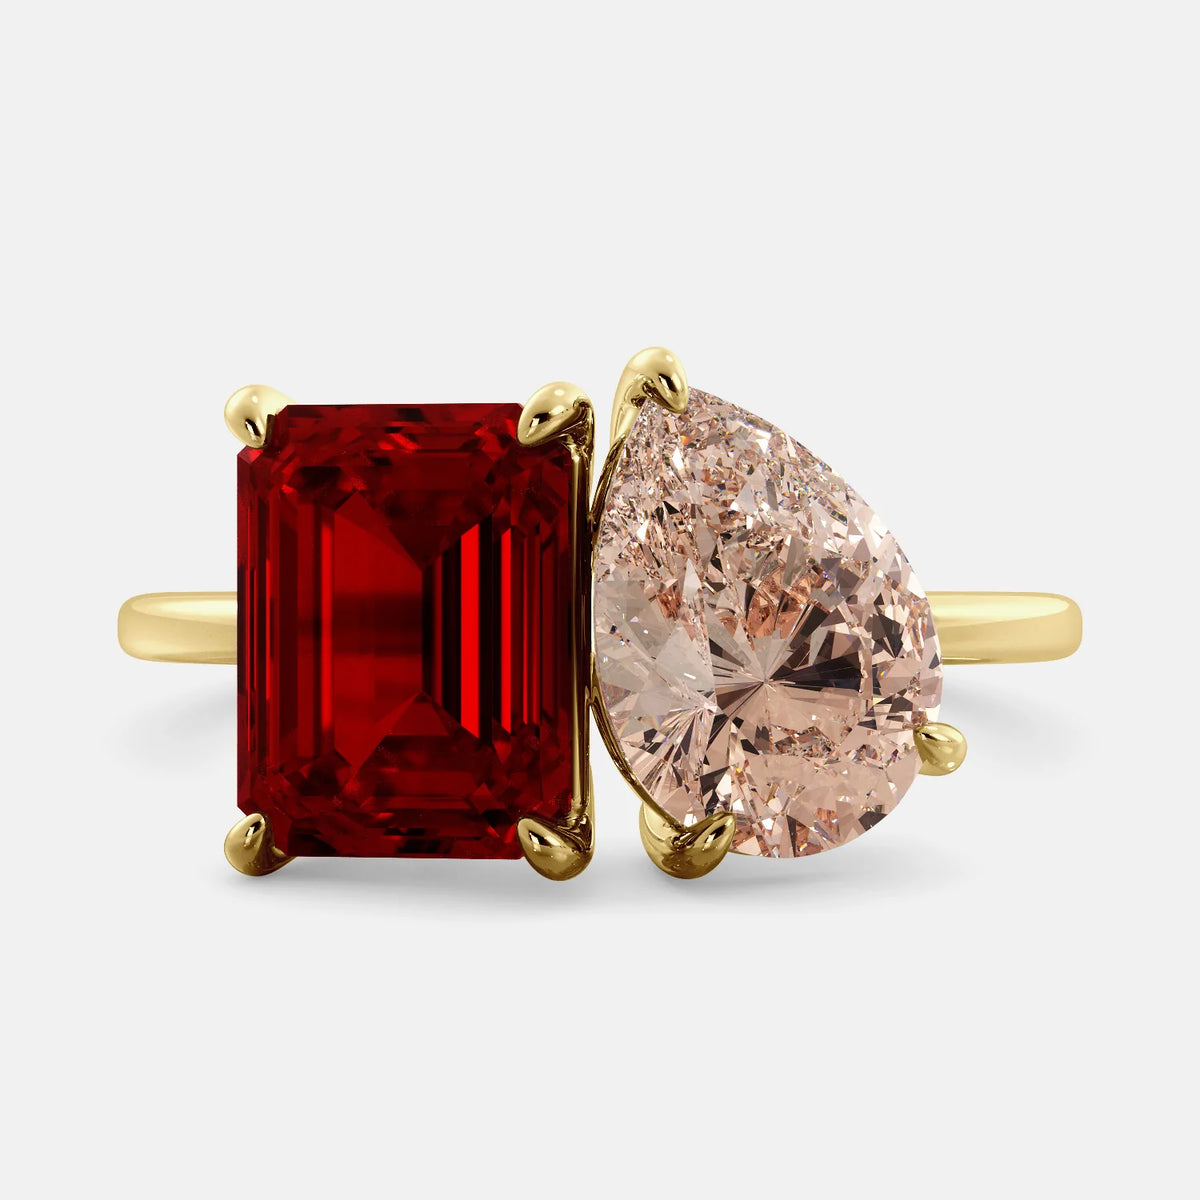 A toi et moi ring with a ruby stone in emerald cut and a pear-shaped stone. The ruby is a deep red color and the pear-shaped stone can be customized to represent the birth month stone of the wearer or a loved one. The ring is made of 14k gold and is available in all sizes. This ring is a perfect gift for any occasion, and it can be customized to make it truly unique.